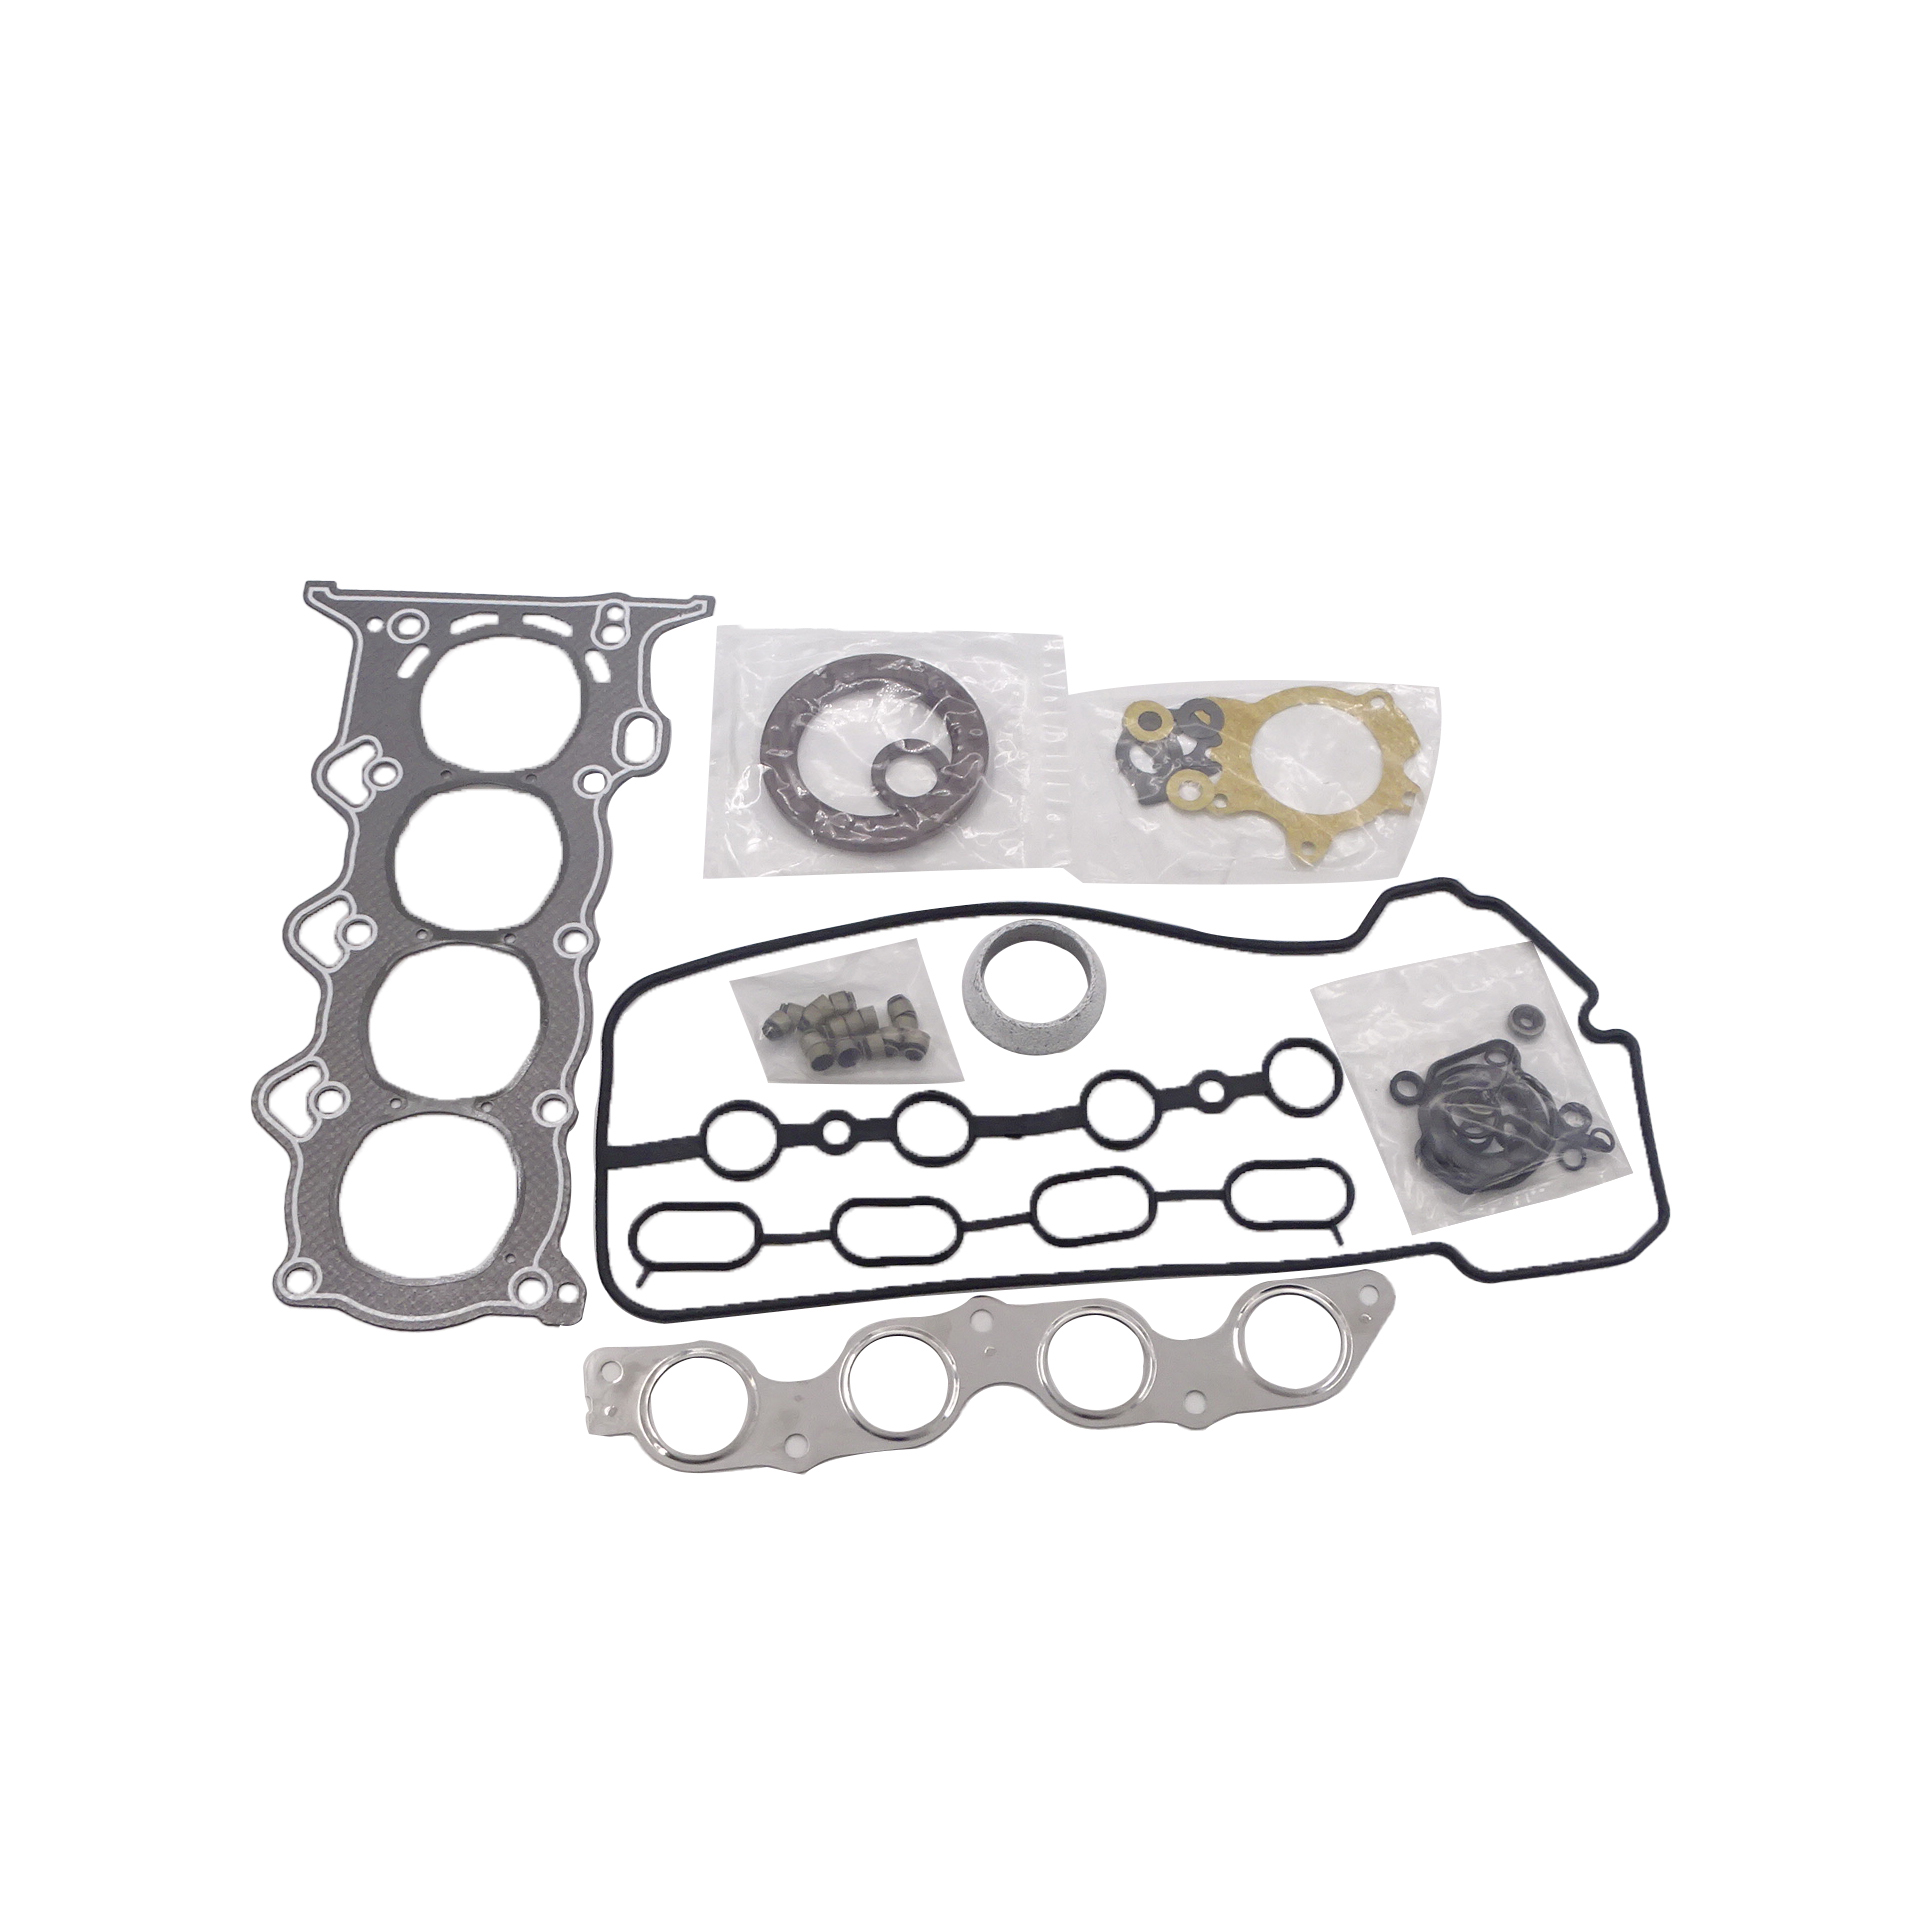 Head Gasket Kit for Toyota Vios 1.3L(NCP92) 2008-2013 OE:04111-21232